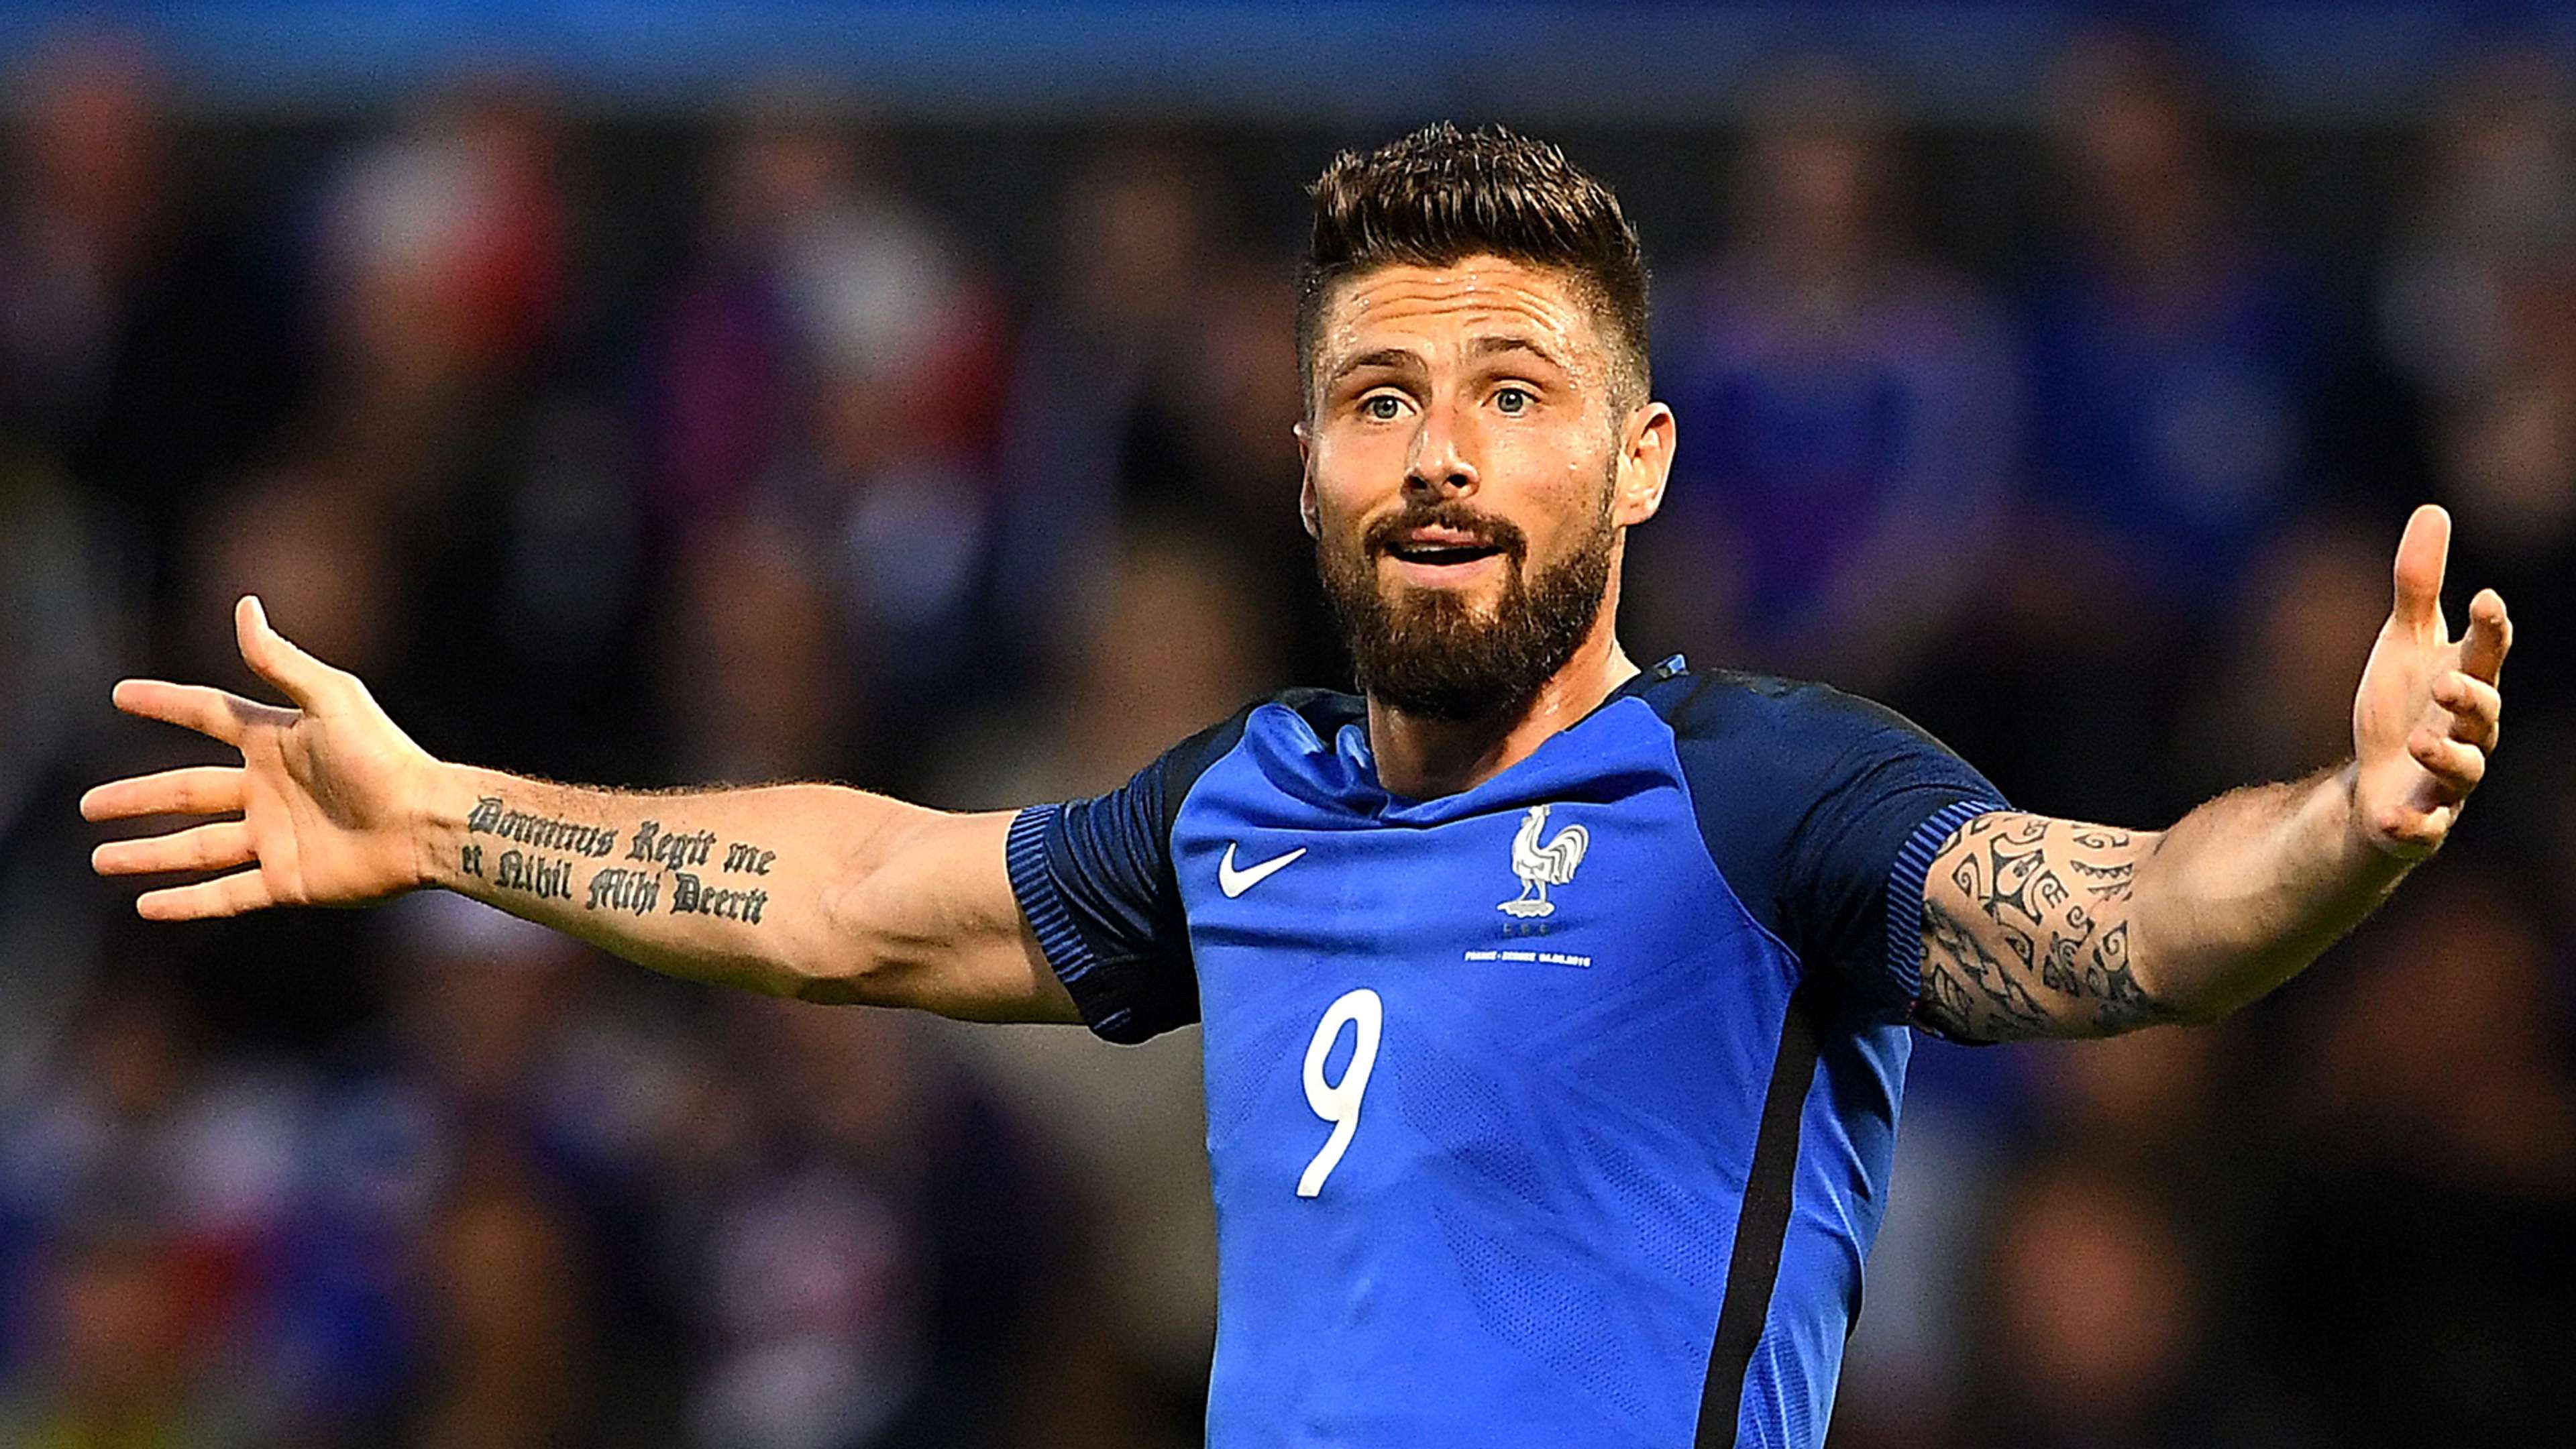 Giroud appeals to the referee